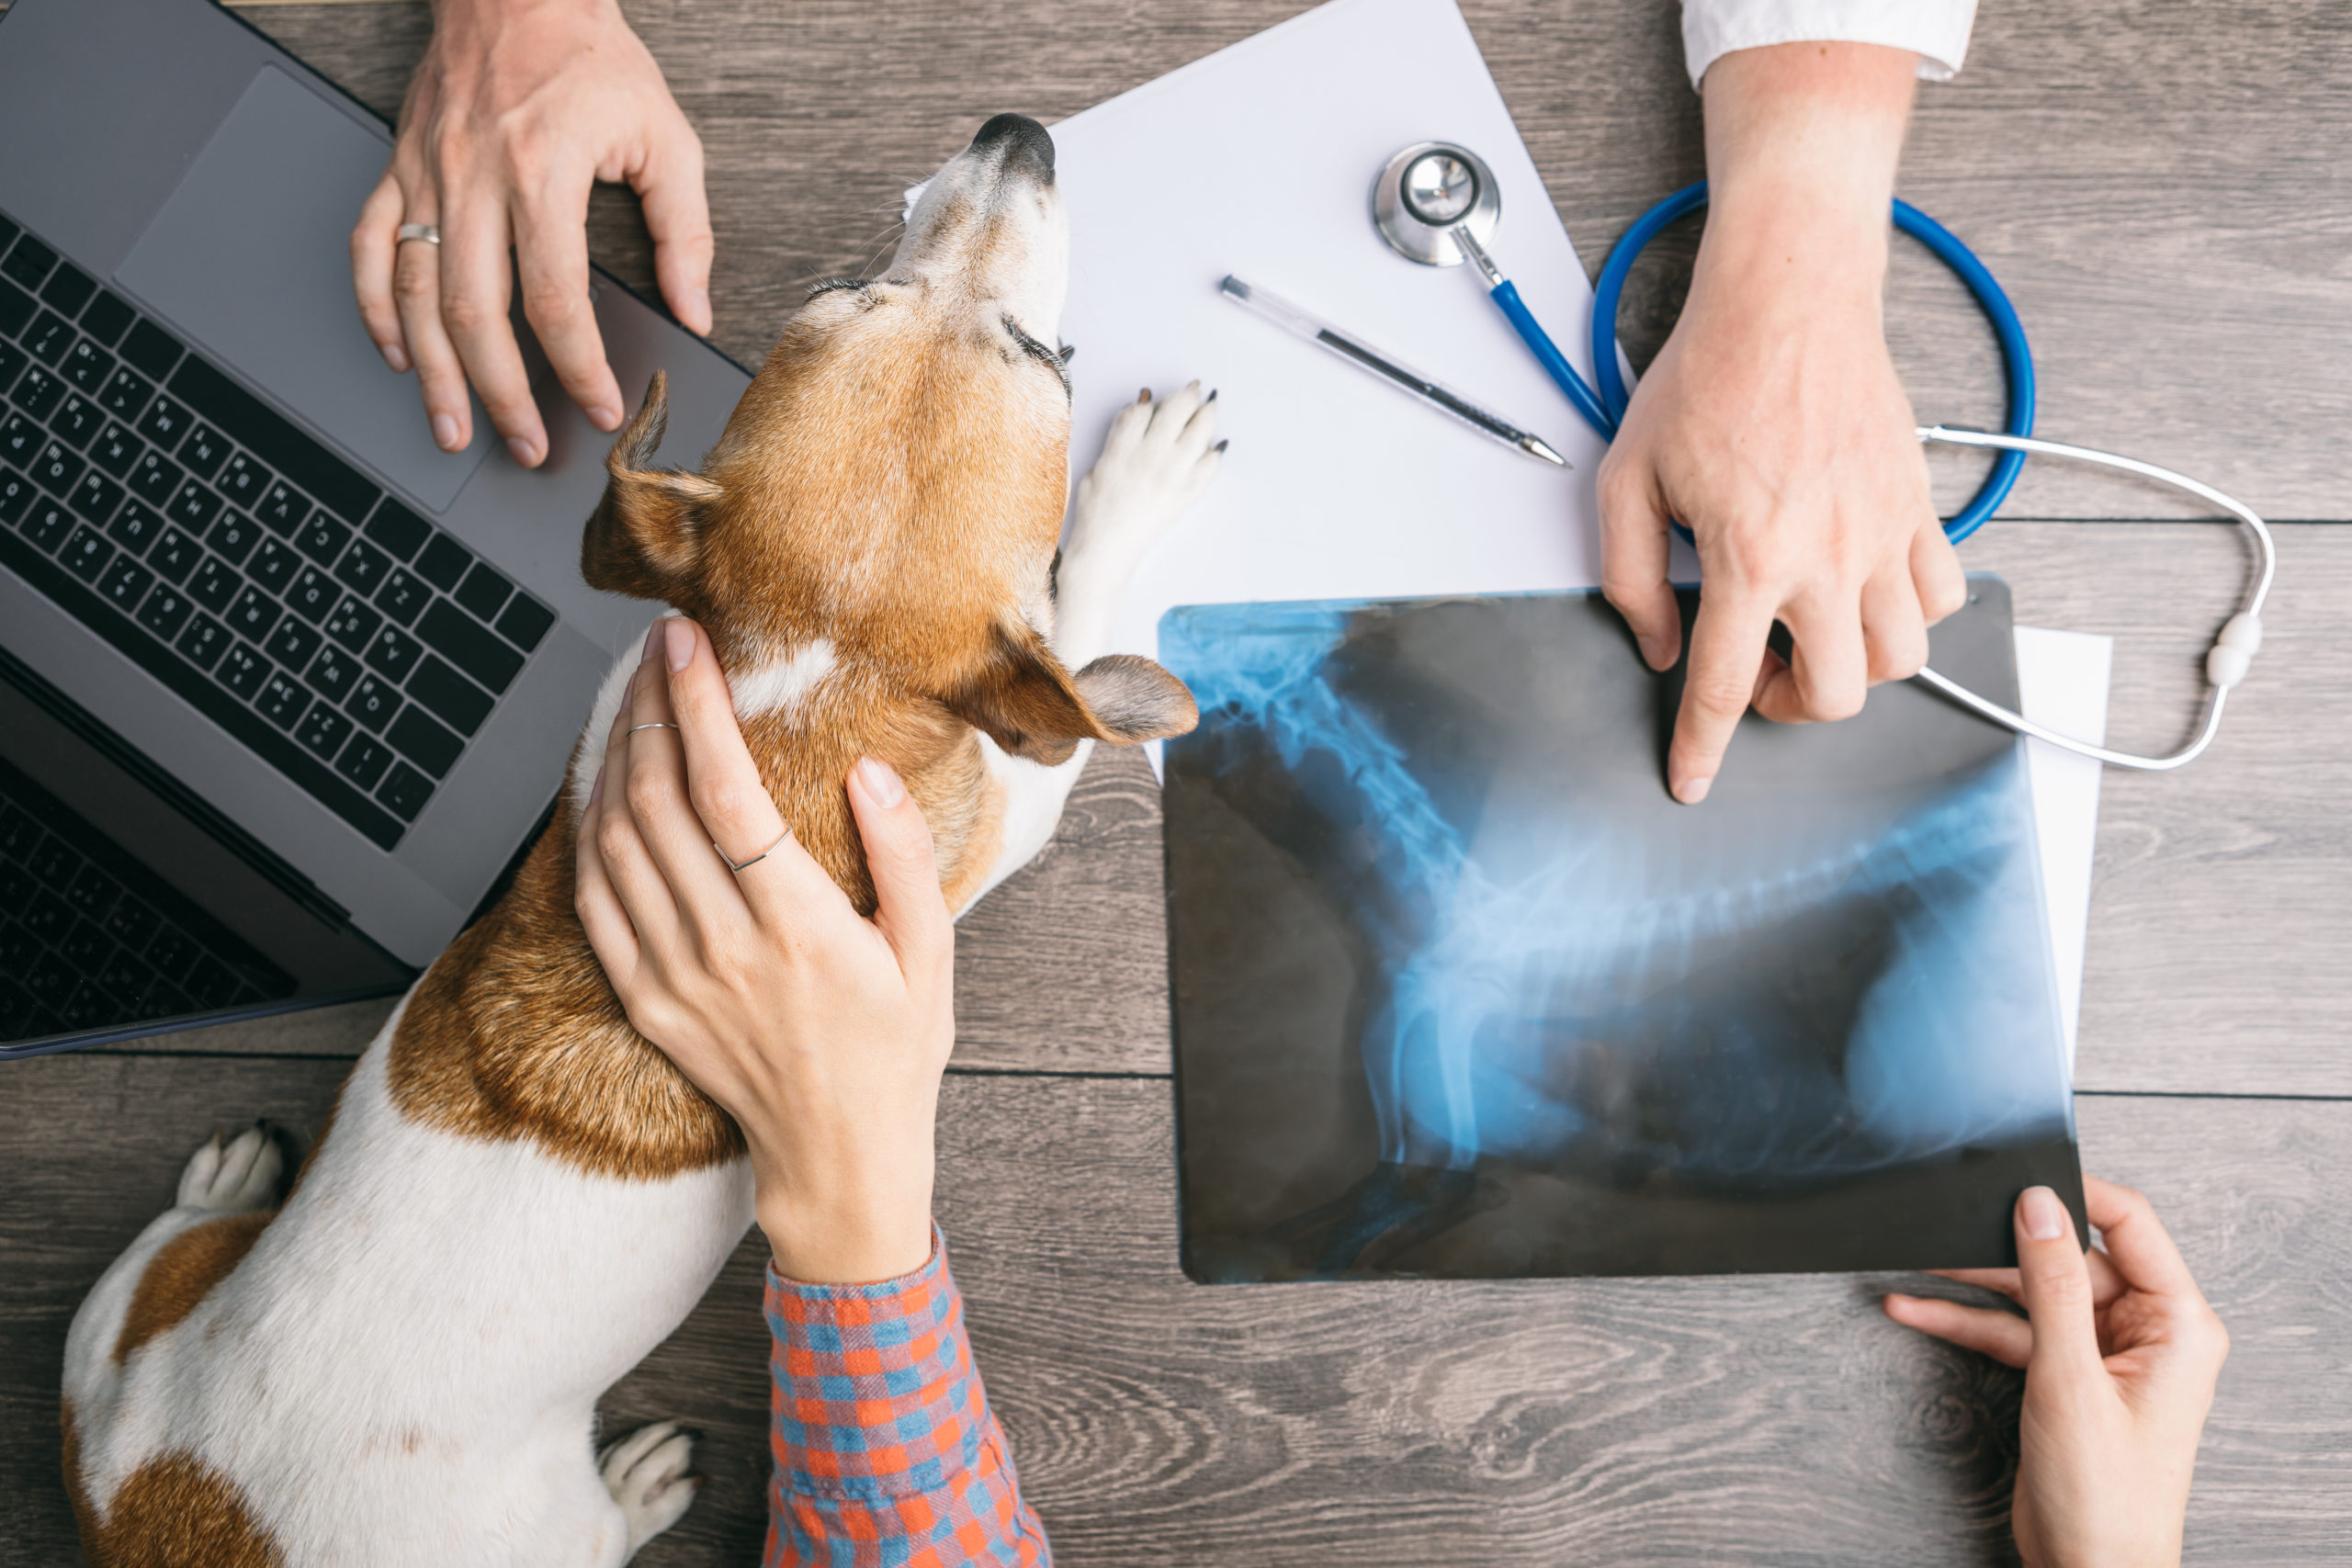 veterinary examination consultation with an X-ray. Dog Jack Russell terrier and owners and doctors hands on the table with computer.